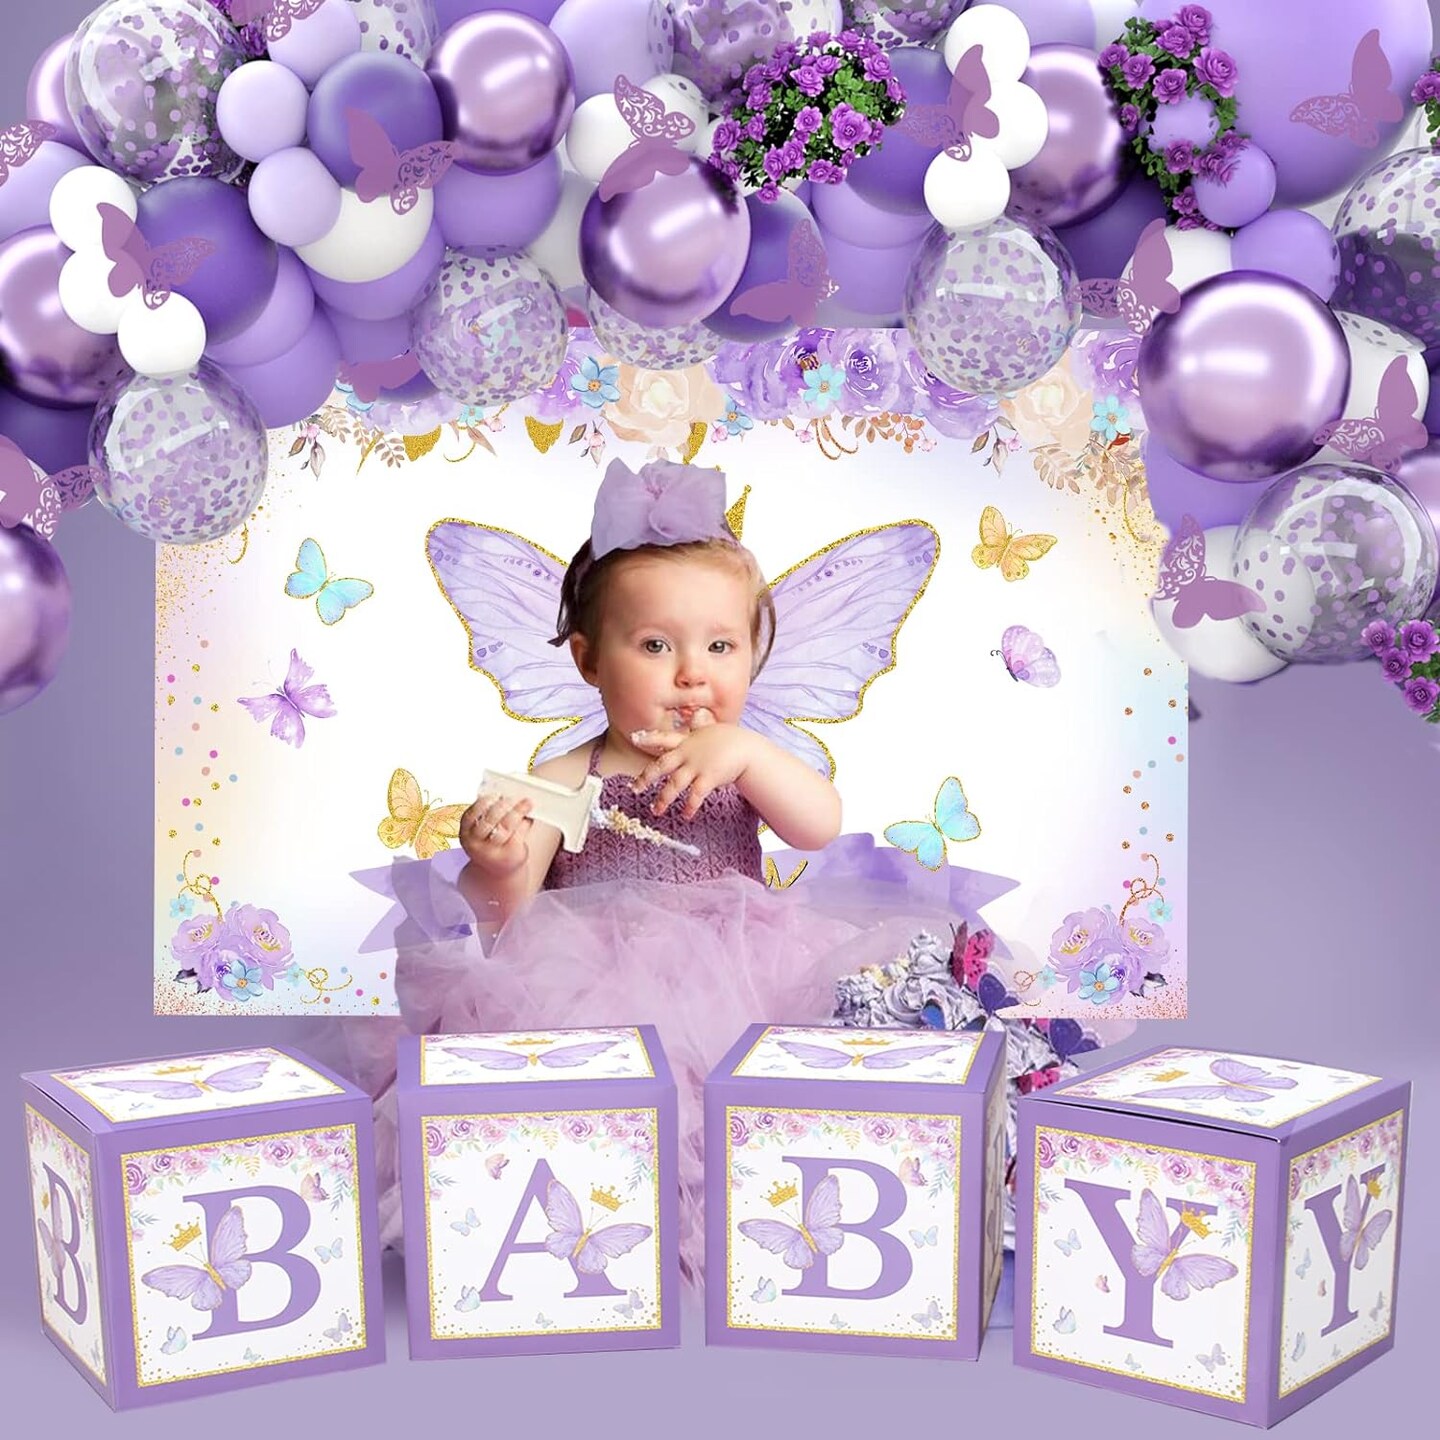 Purple Butterfly Baby Shower Decorations for Girl&#xFF0C;Purple Balloon Garland Arch Kit&#xFF0C;Purple Butterfly Baby Boxes and Butterfly Backdrop Kit for Baby Shower Butterfly Birthday Lavender Party Decorations